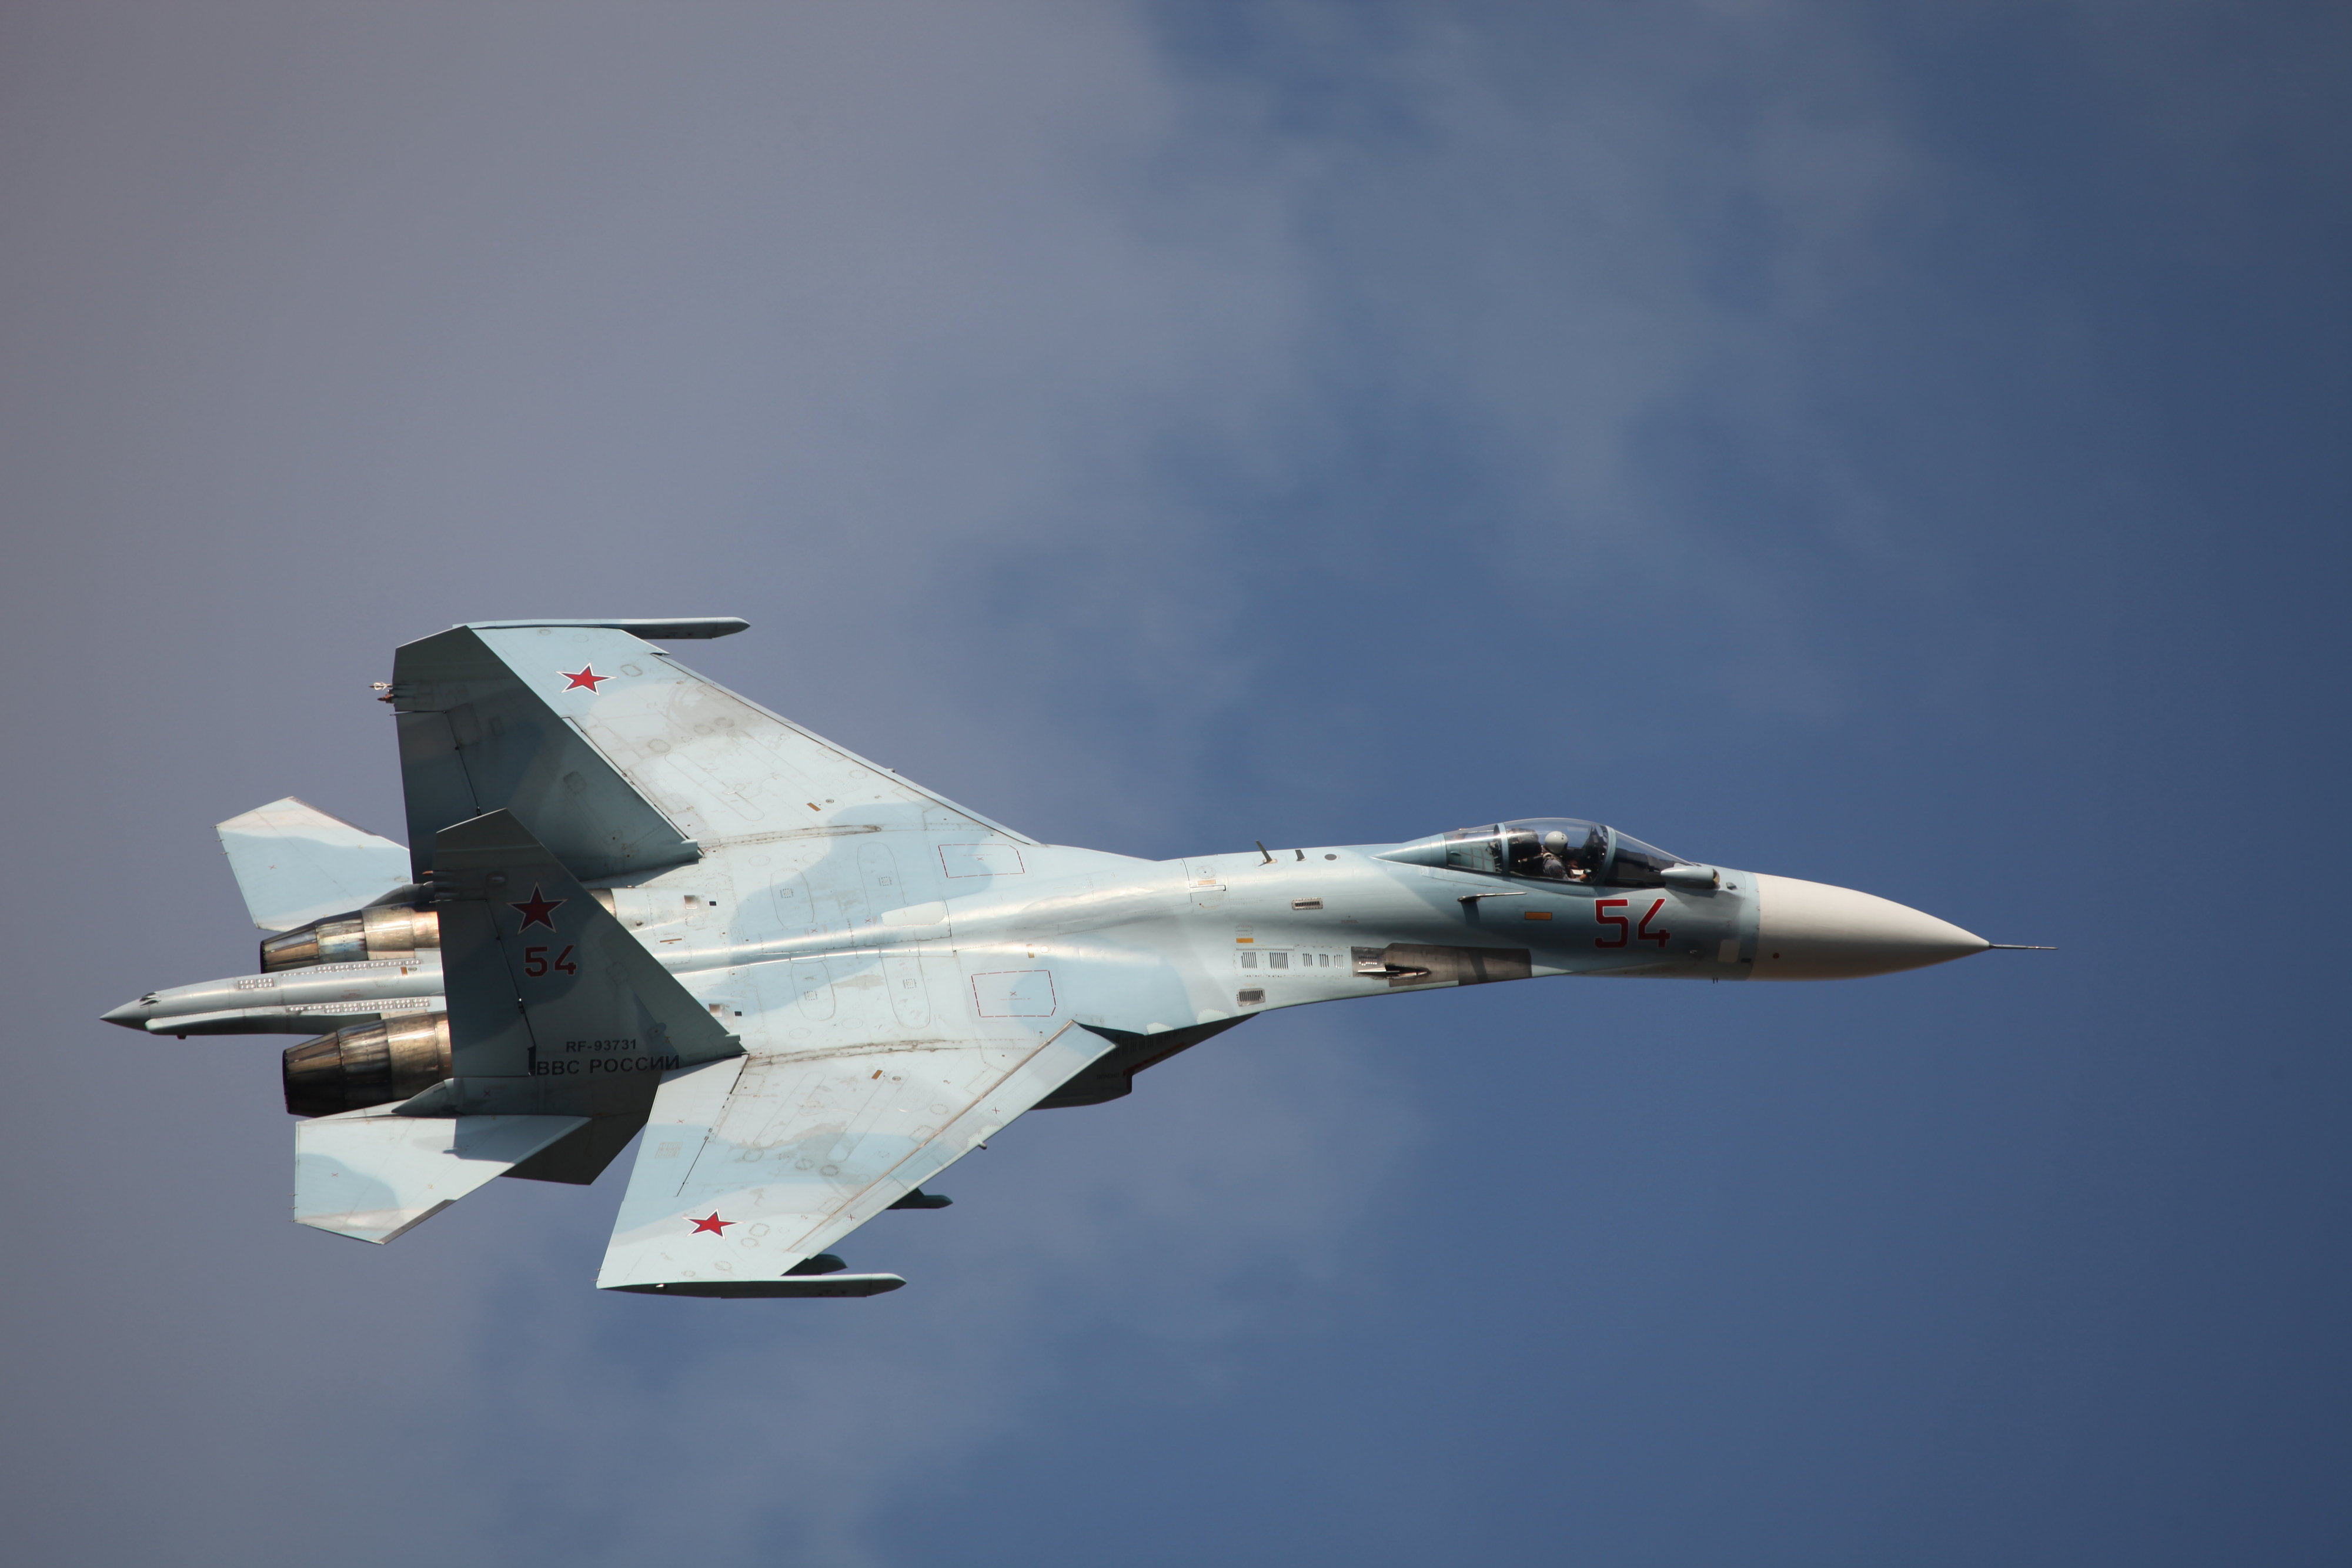 military, sukhoi su 35, air force, aircraft, jet fighter, warplane, jet fighters